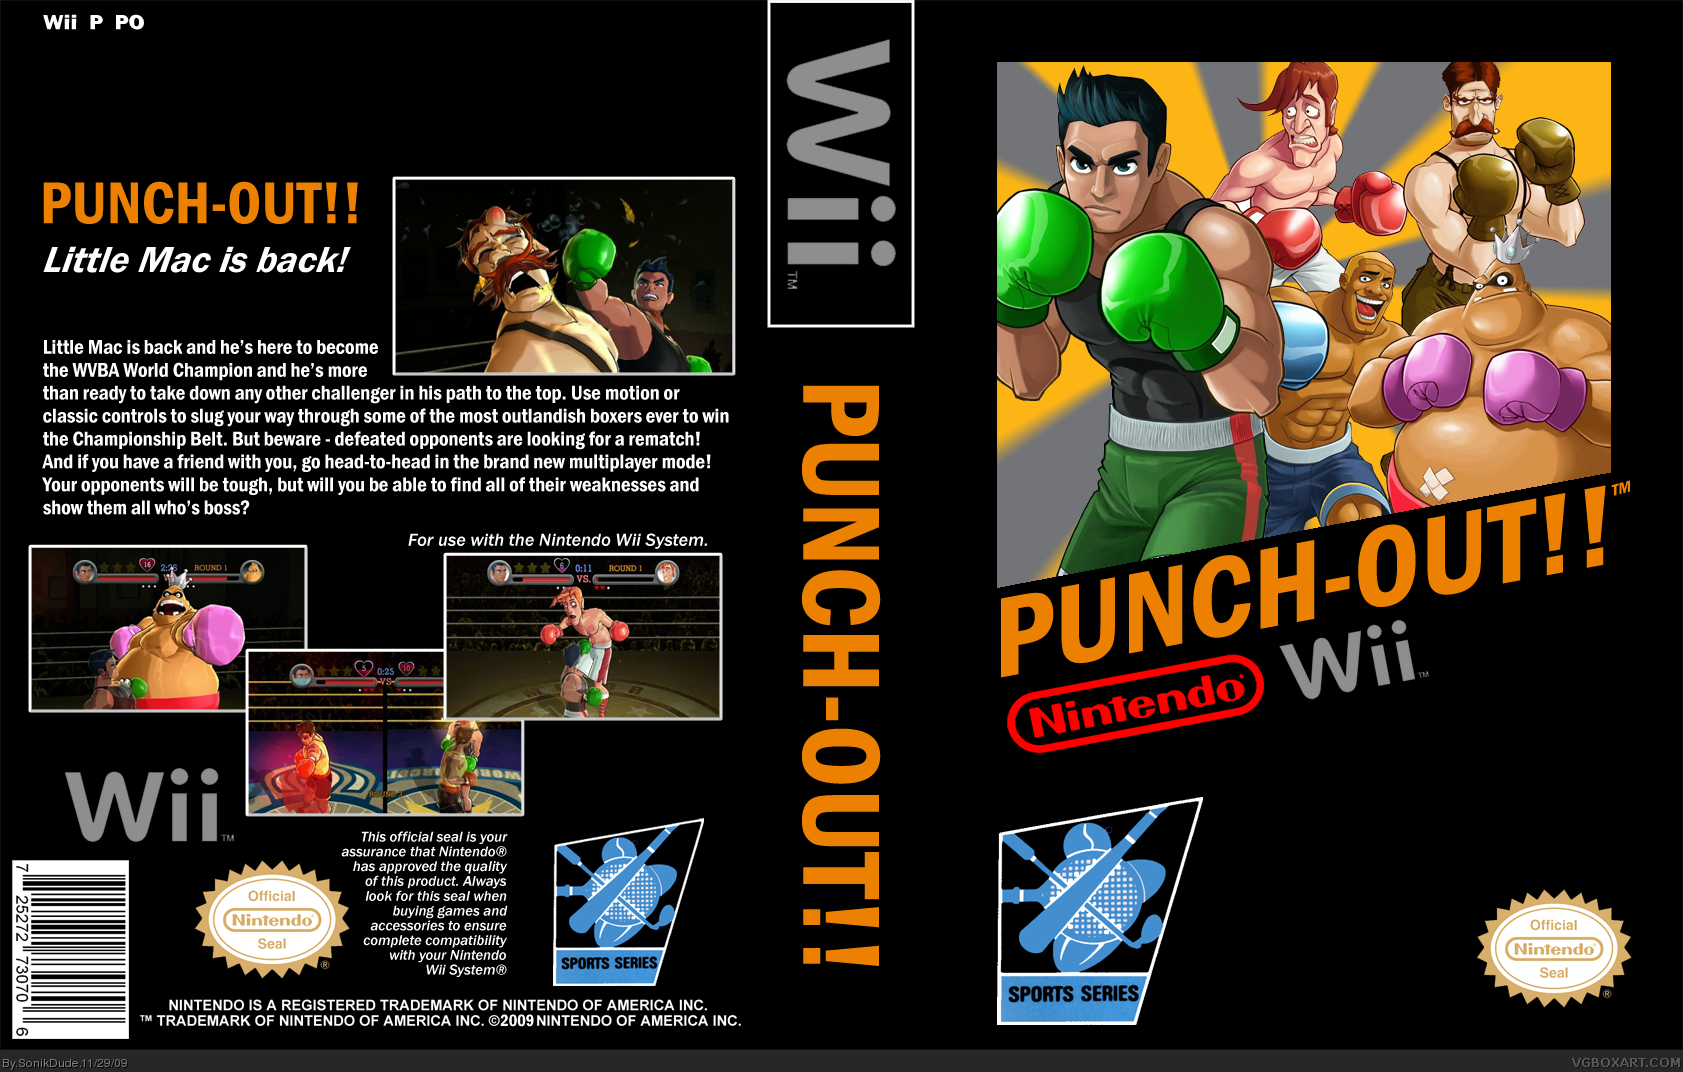 Punch-Out!! box cover